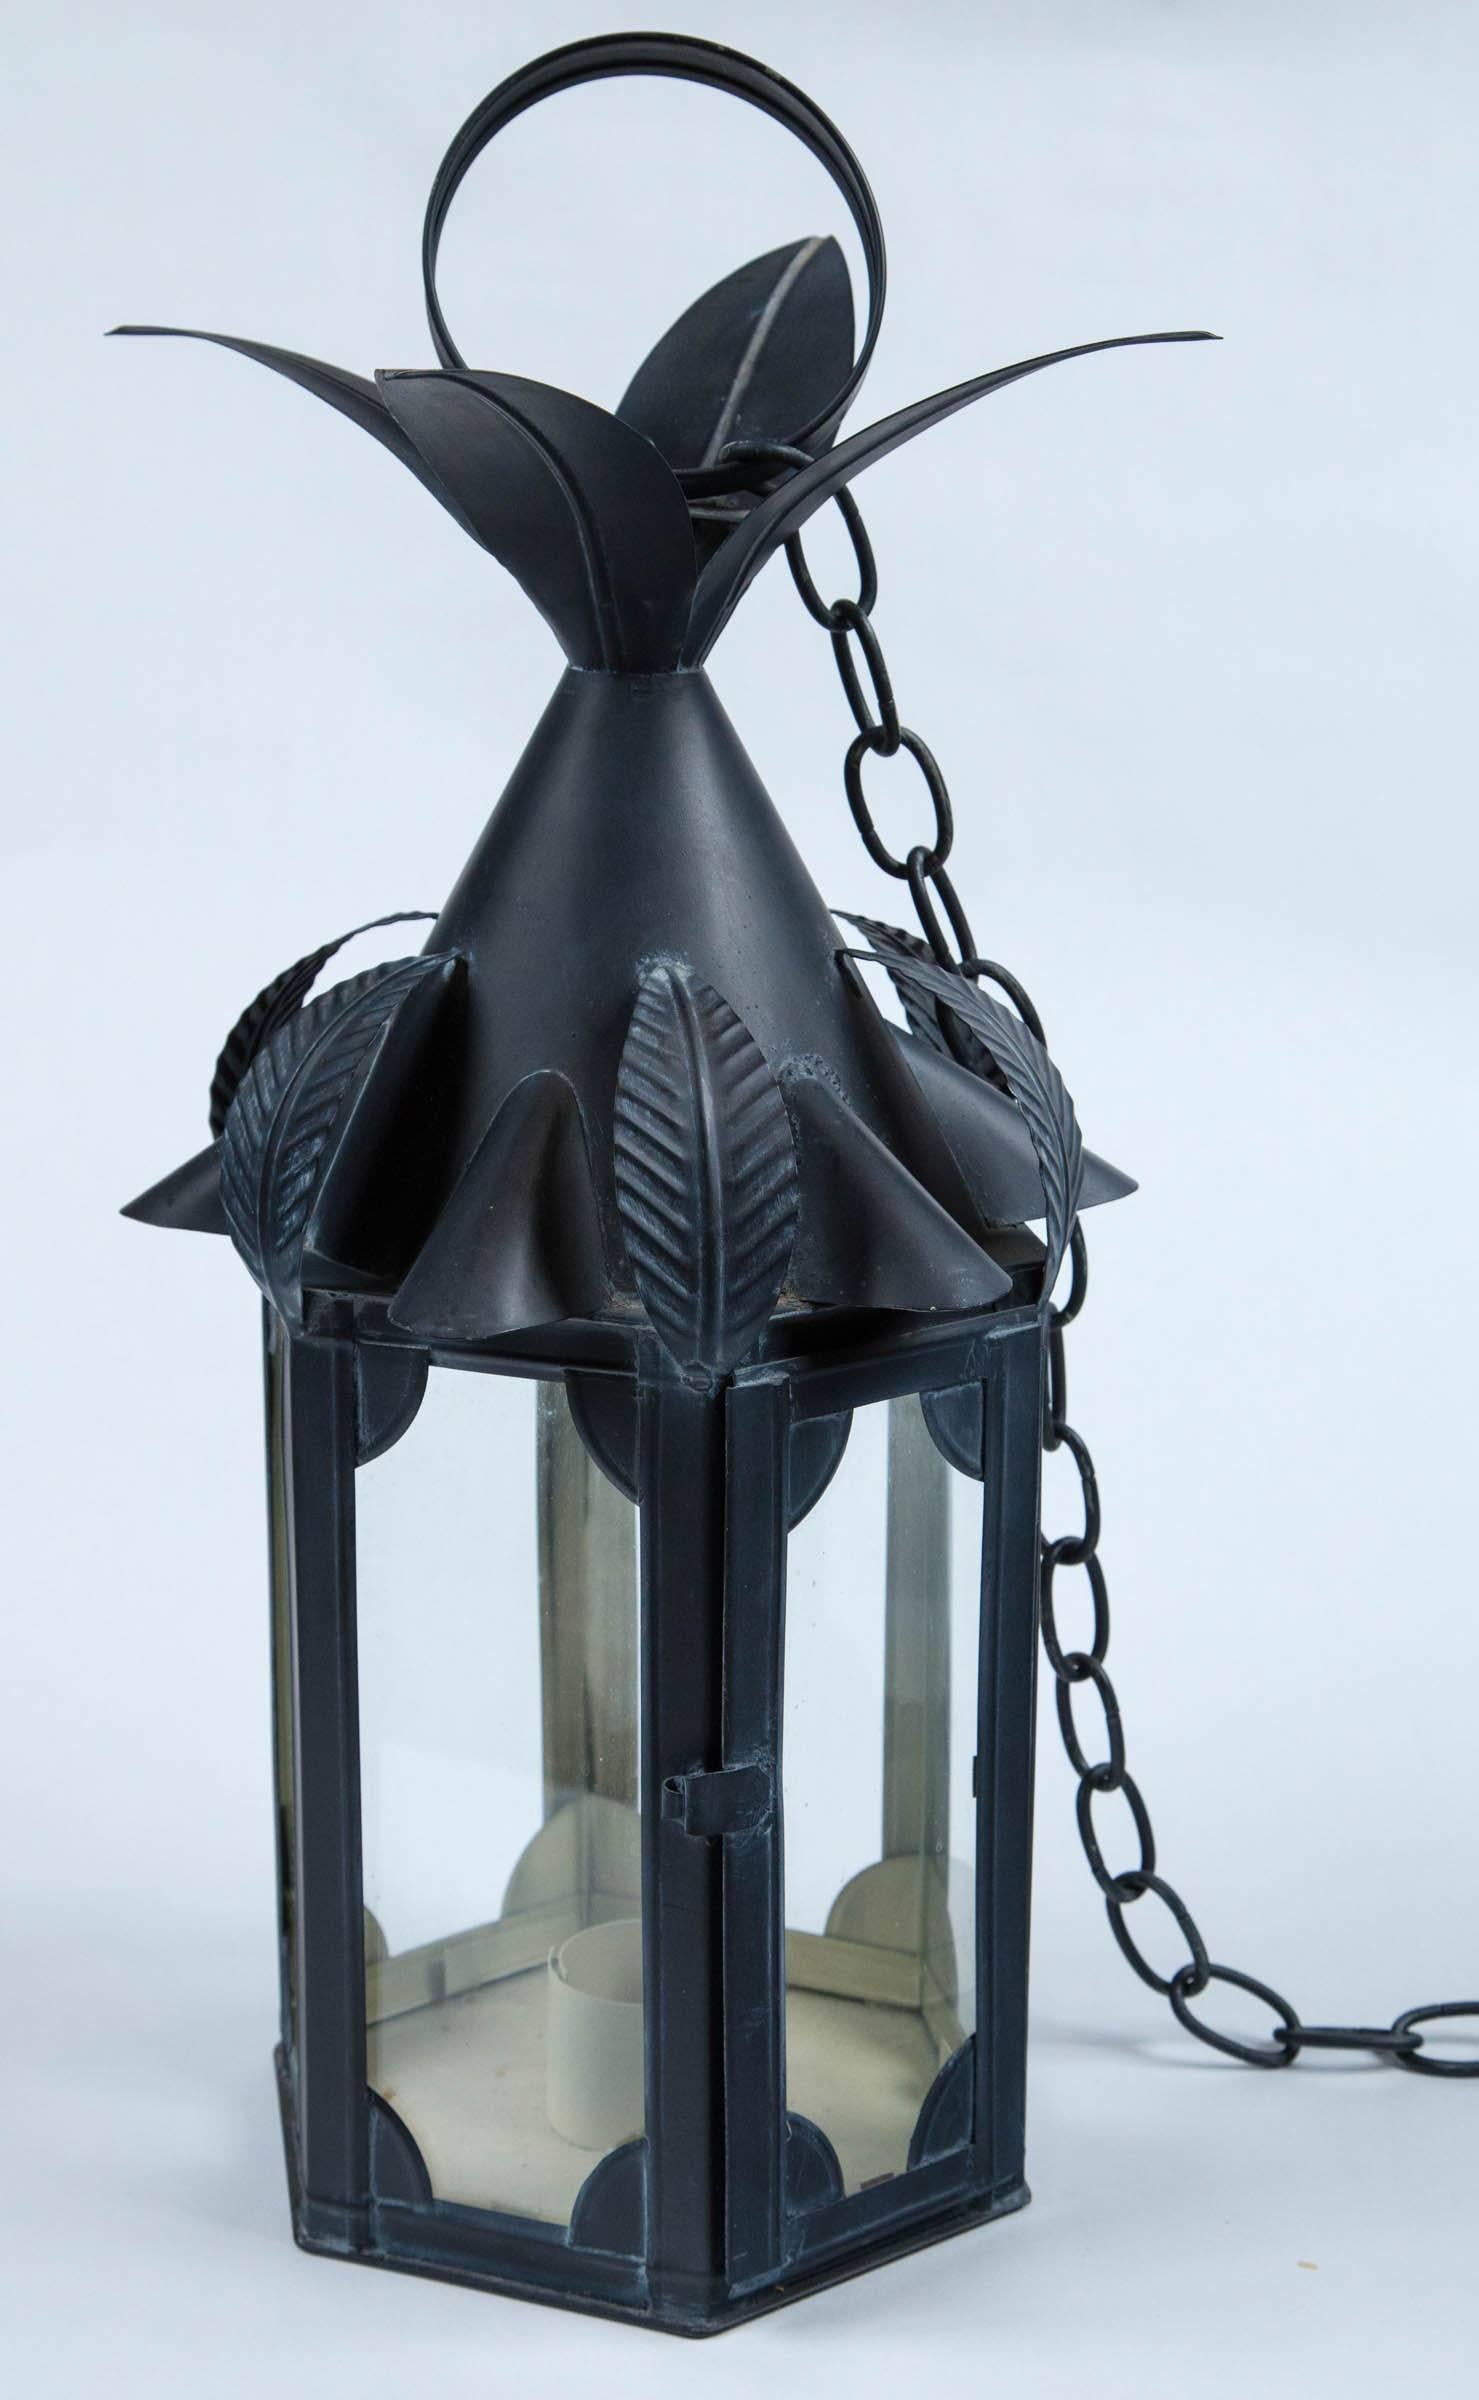 Old new stock small black metal lantern with large leaves. Three lanterns are available. No wiring.